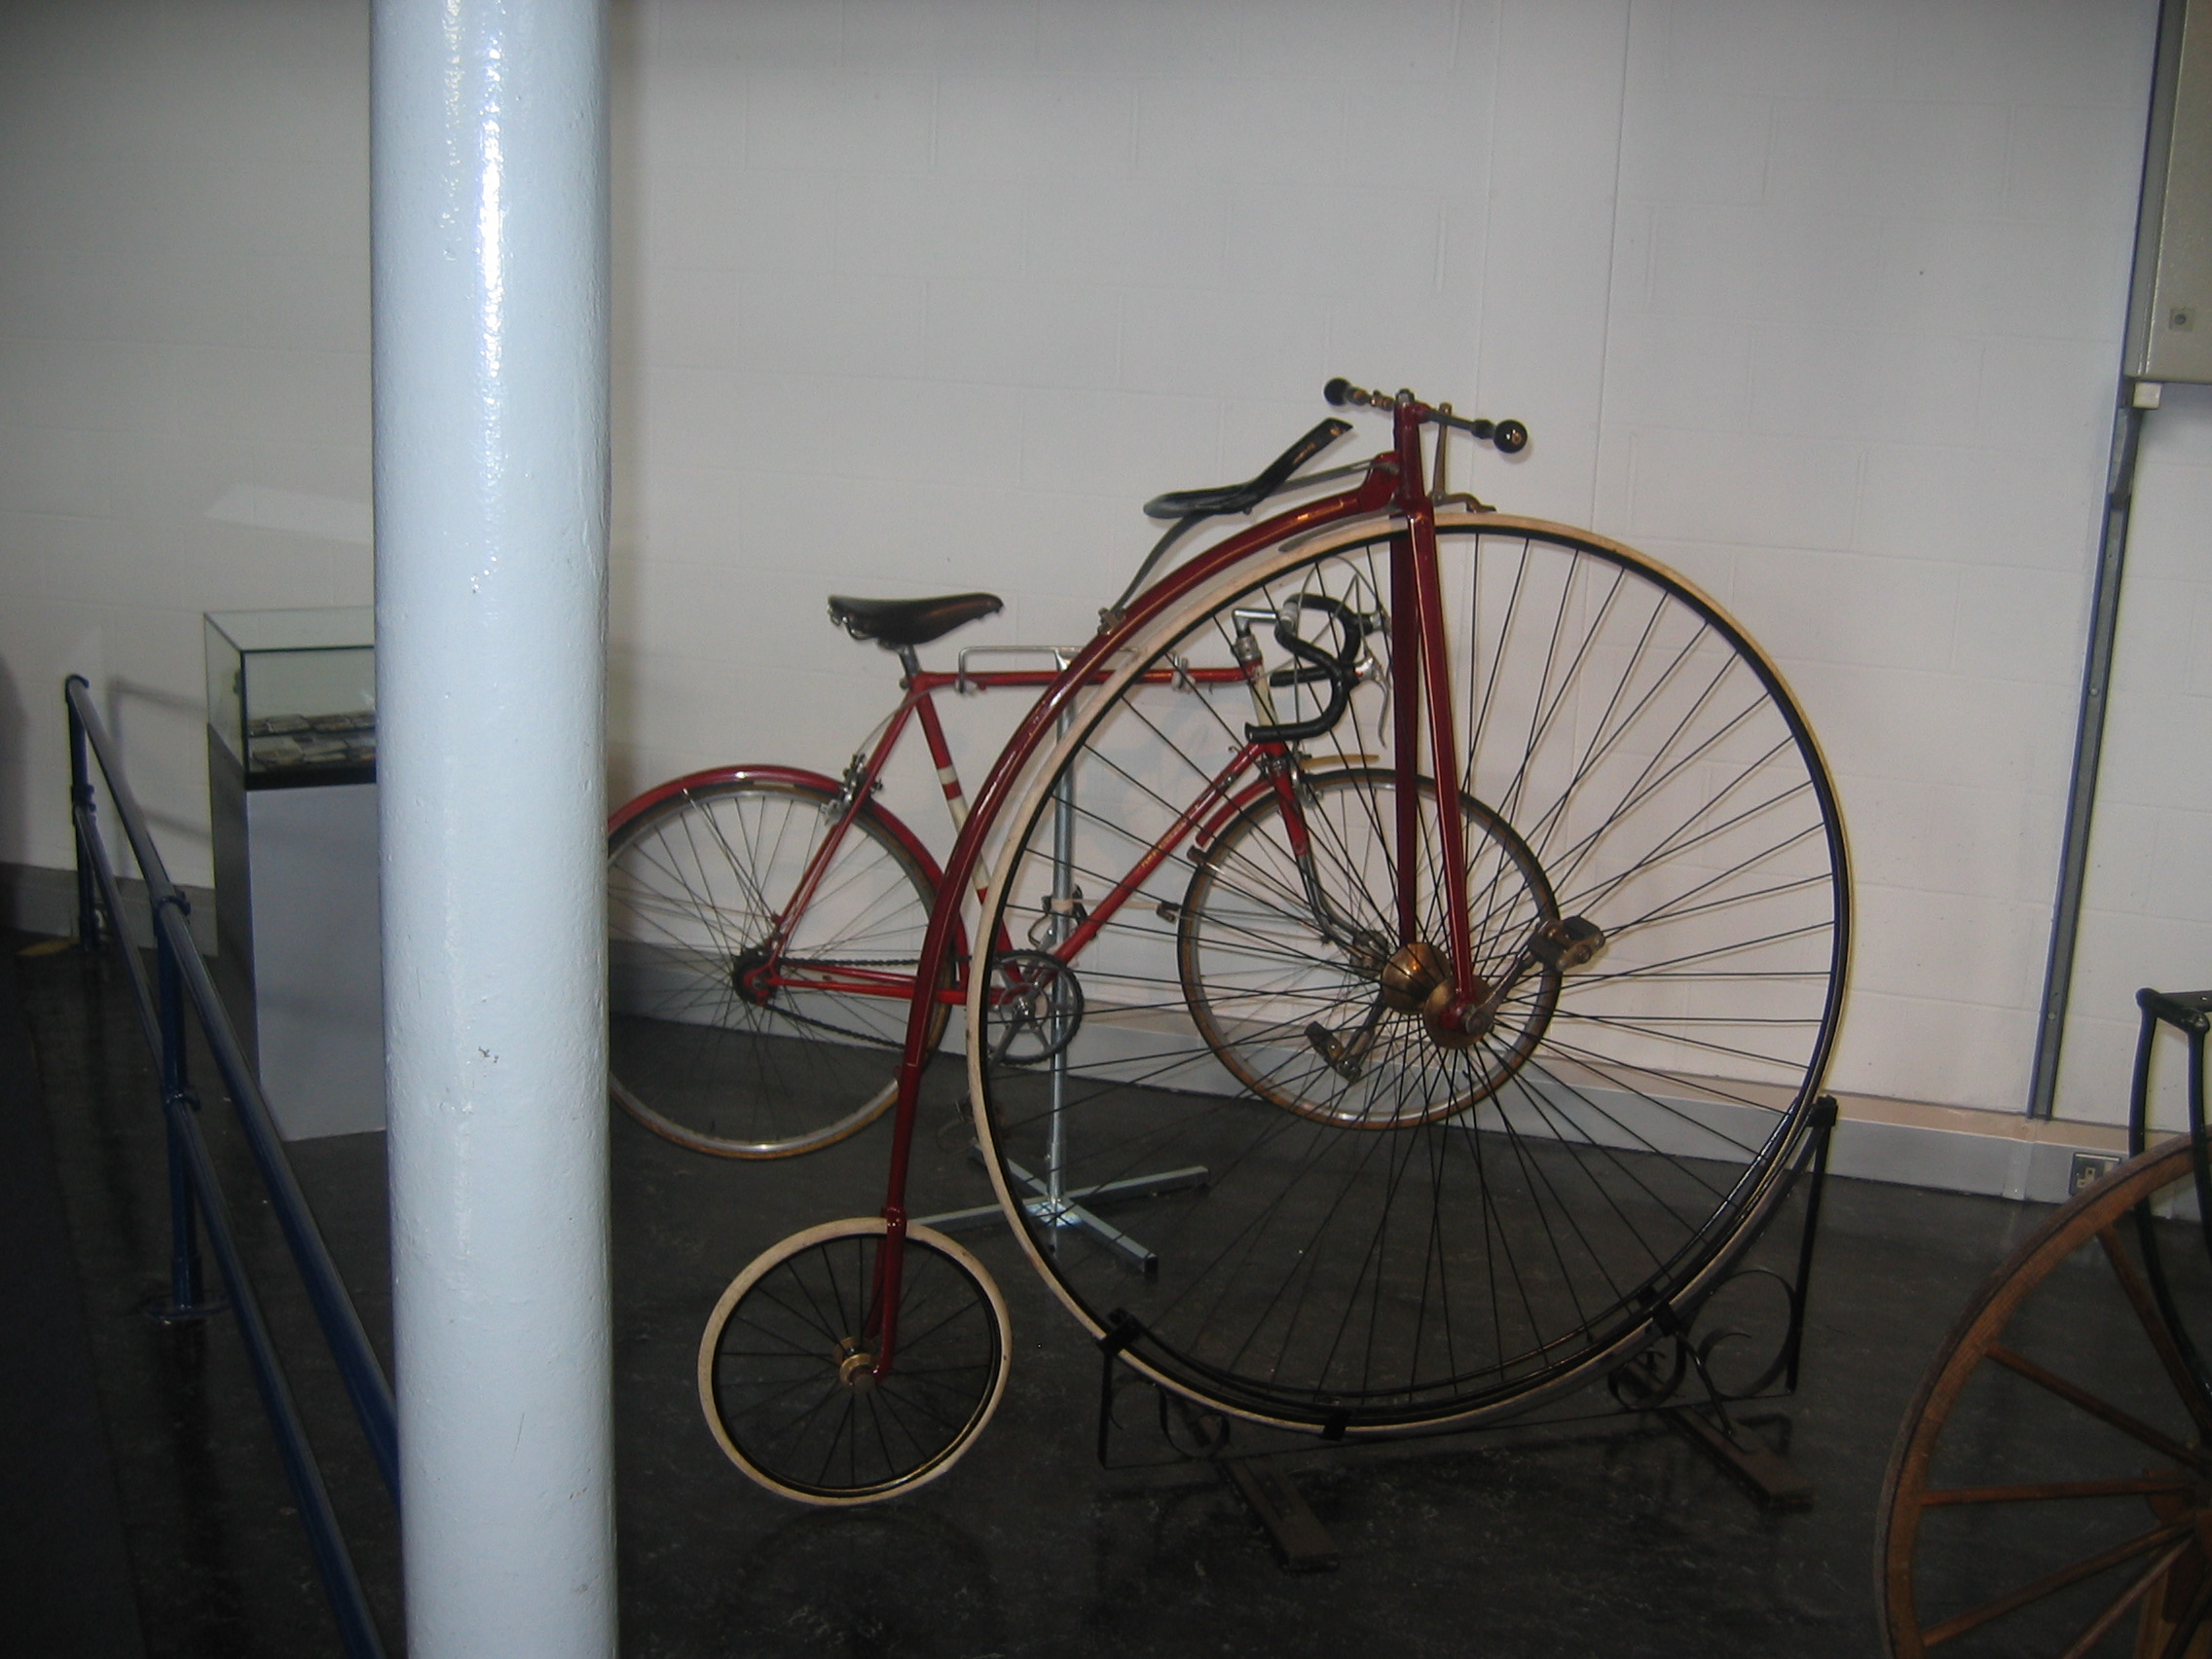 Photo taken by me – The MOSI Penny Farthing